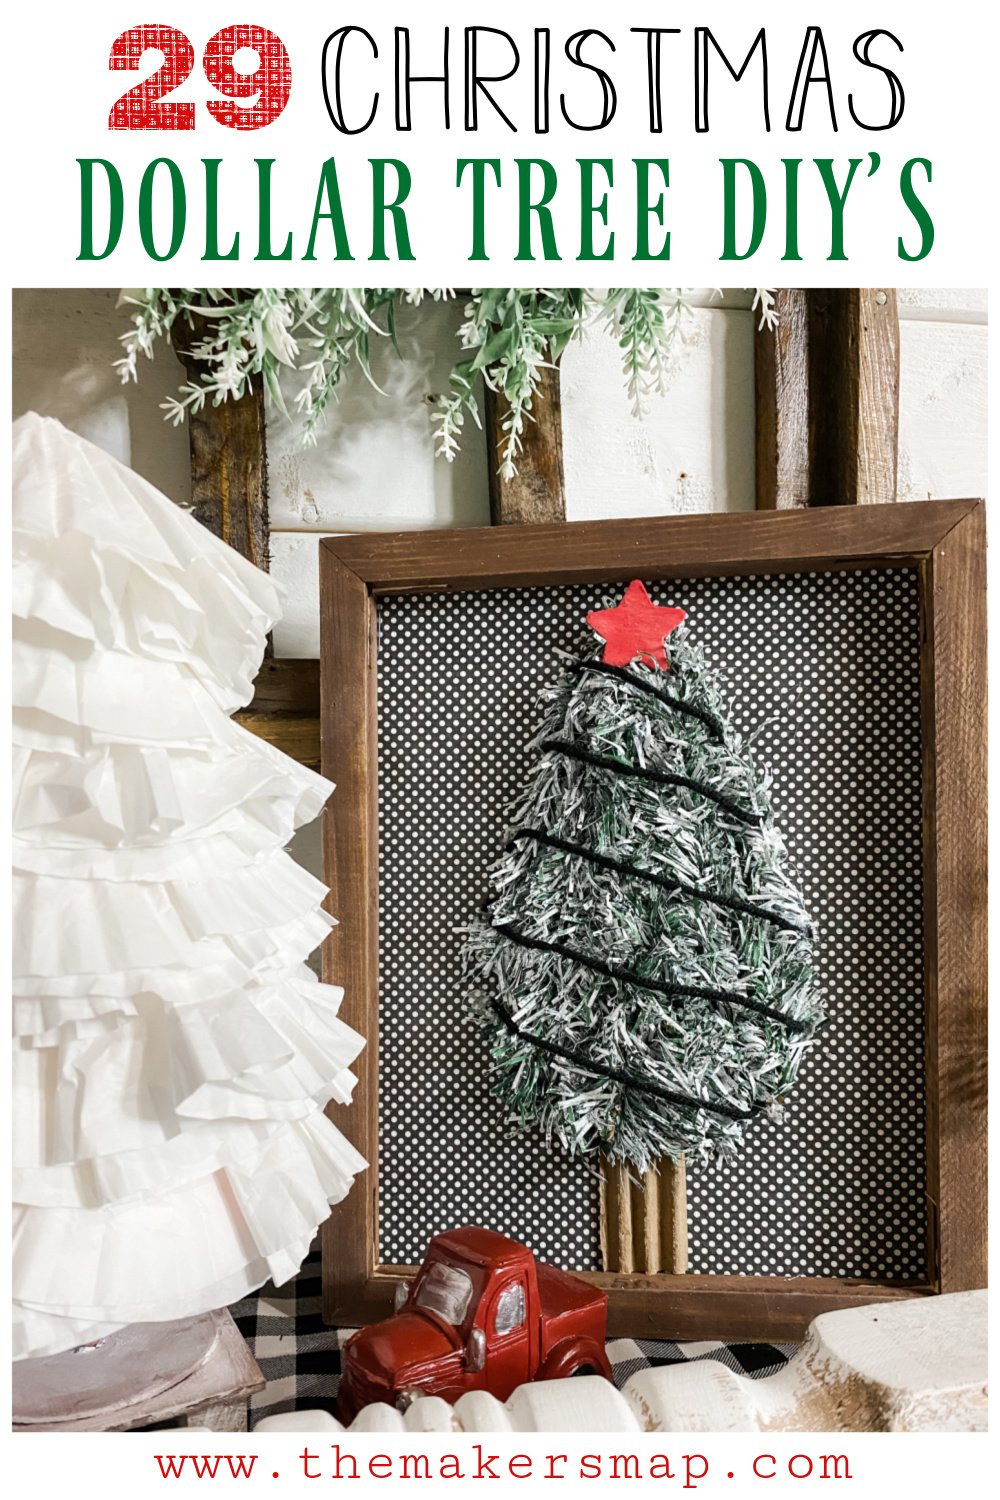 29 Easy DIY Christmas Decor Ideas - The Makers Map with Amber Strong